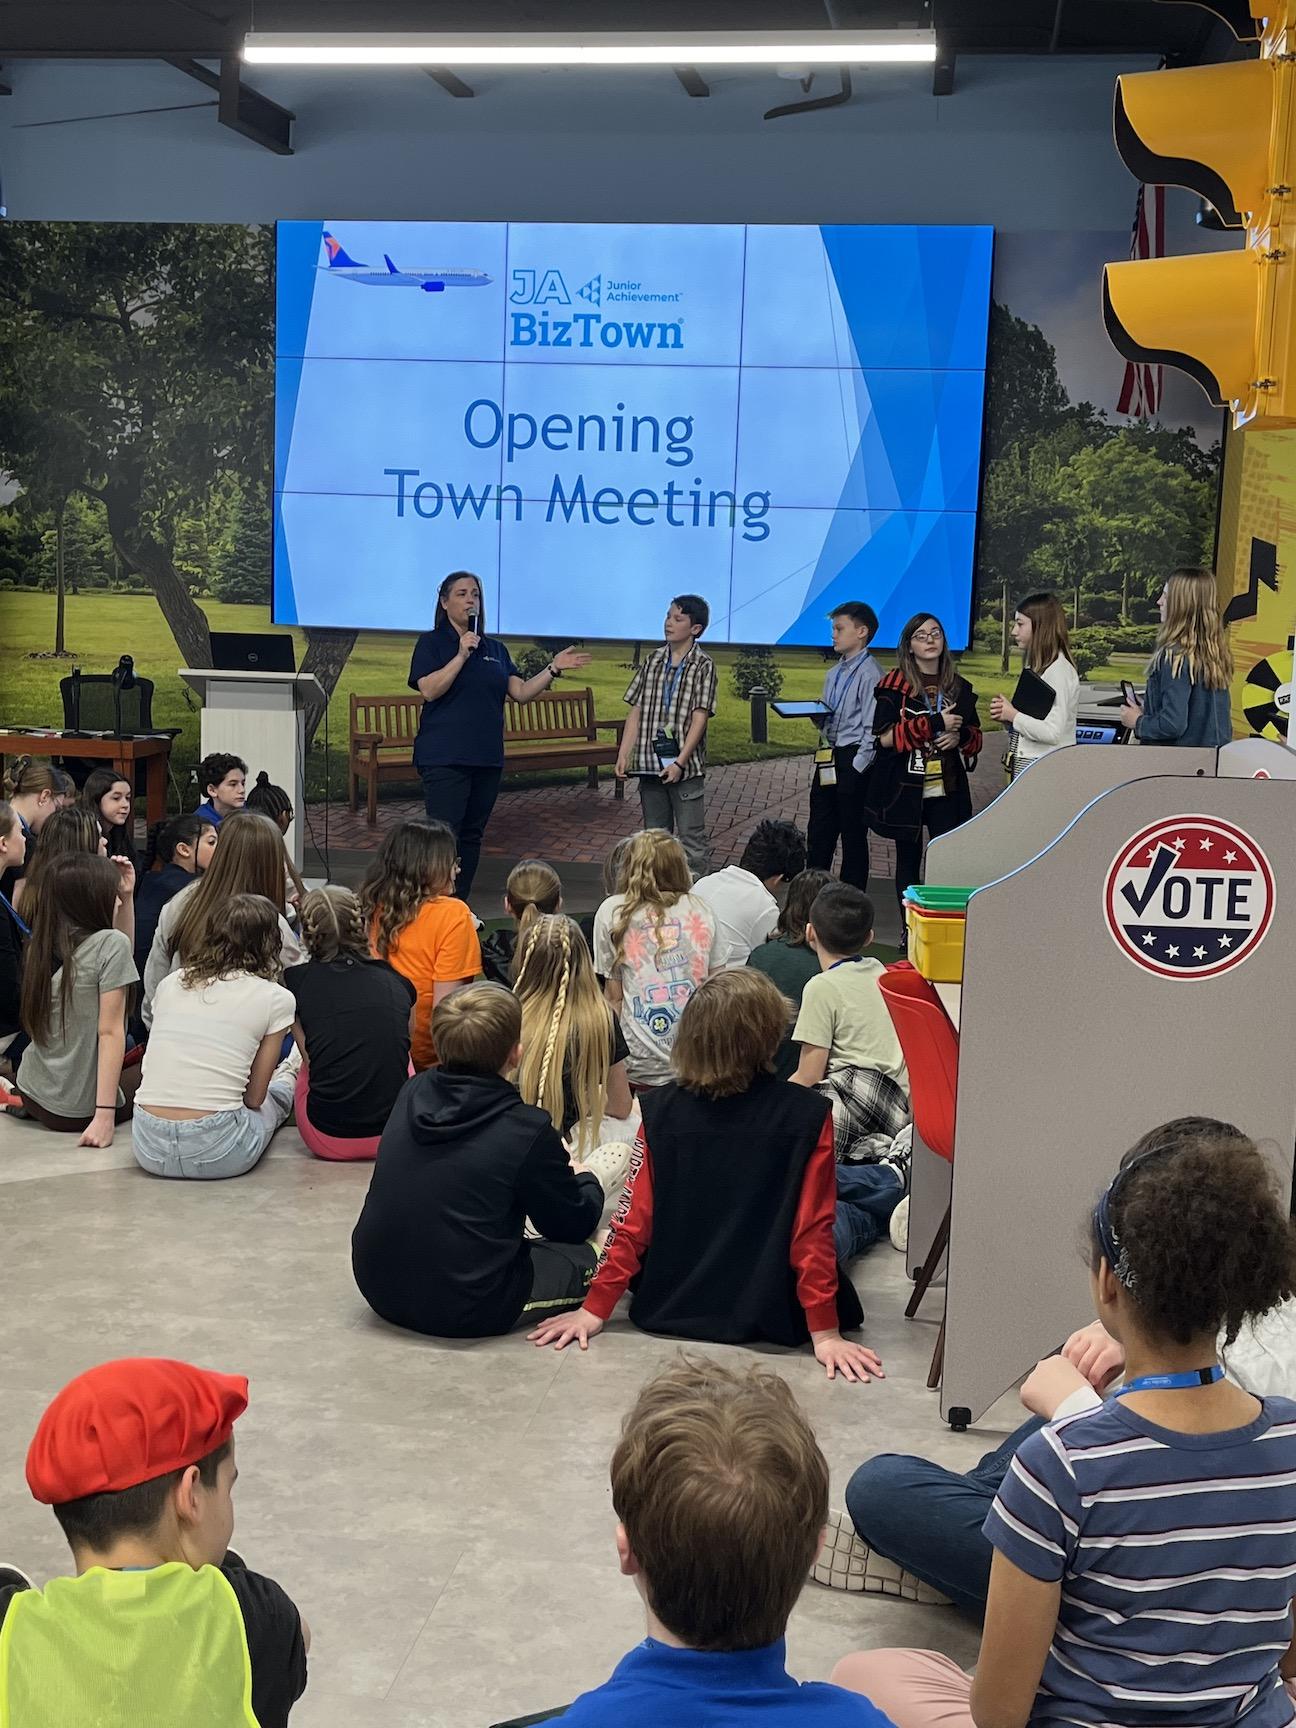 All of the students attended a Town Meeting with student-Mayor Jack Fry and the CEO’s of all the businesses at JA Biztown